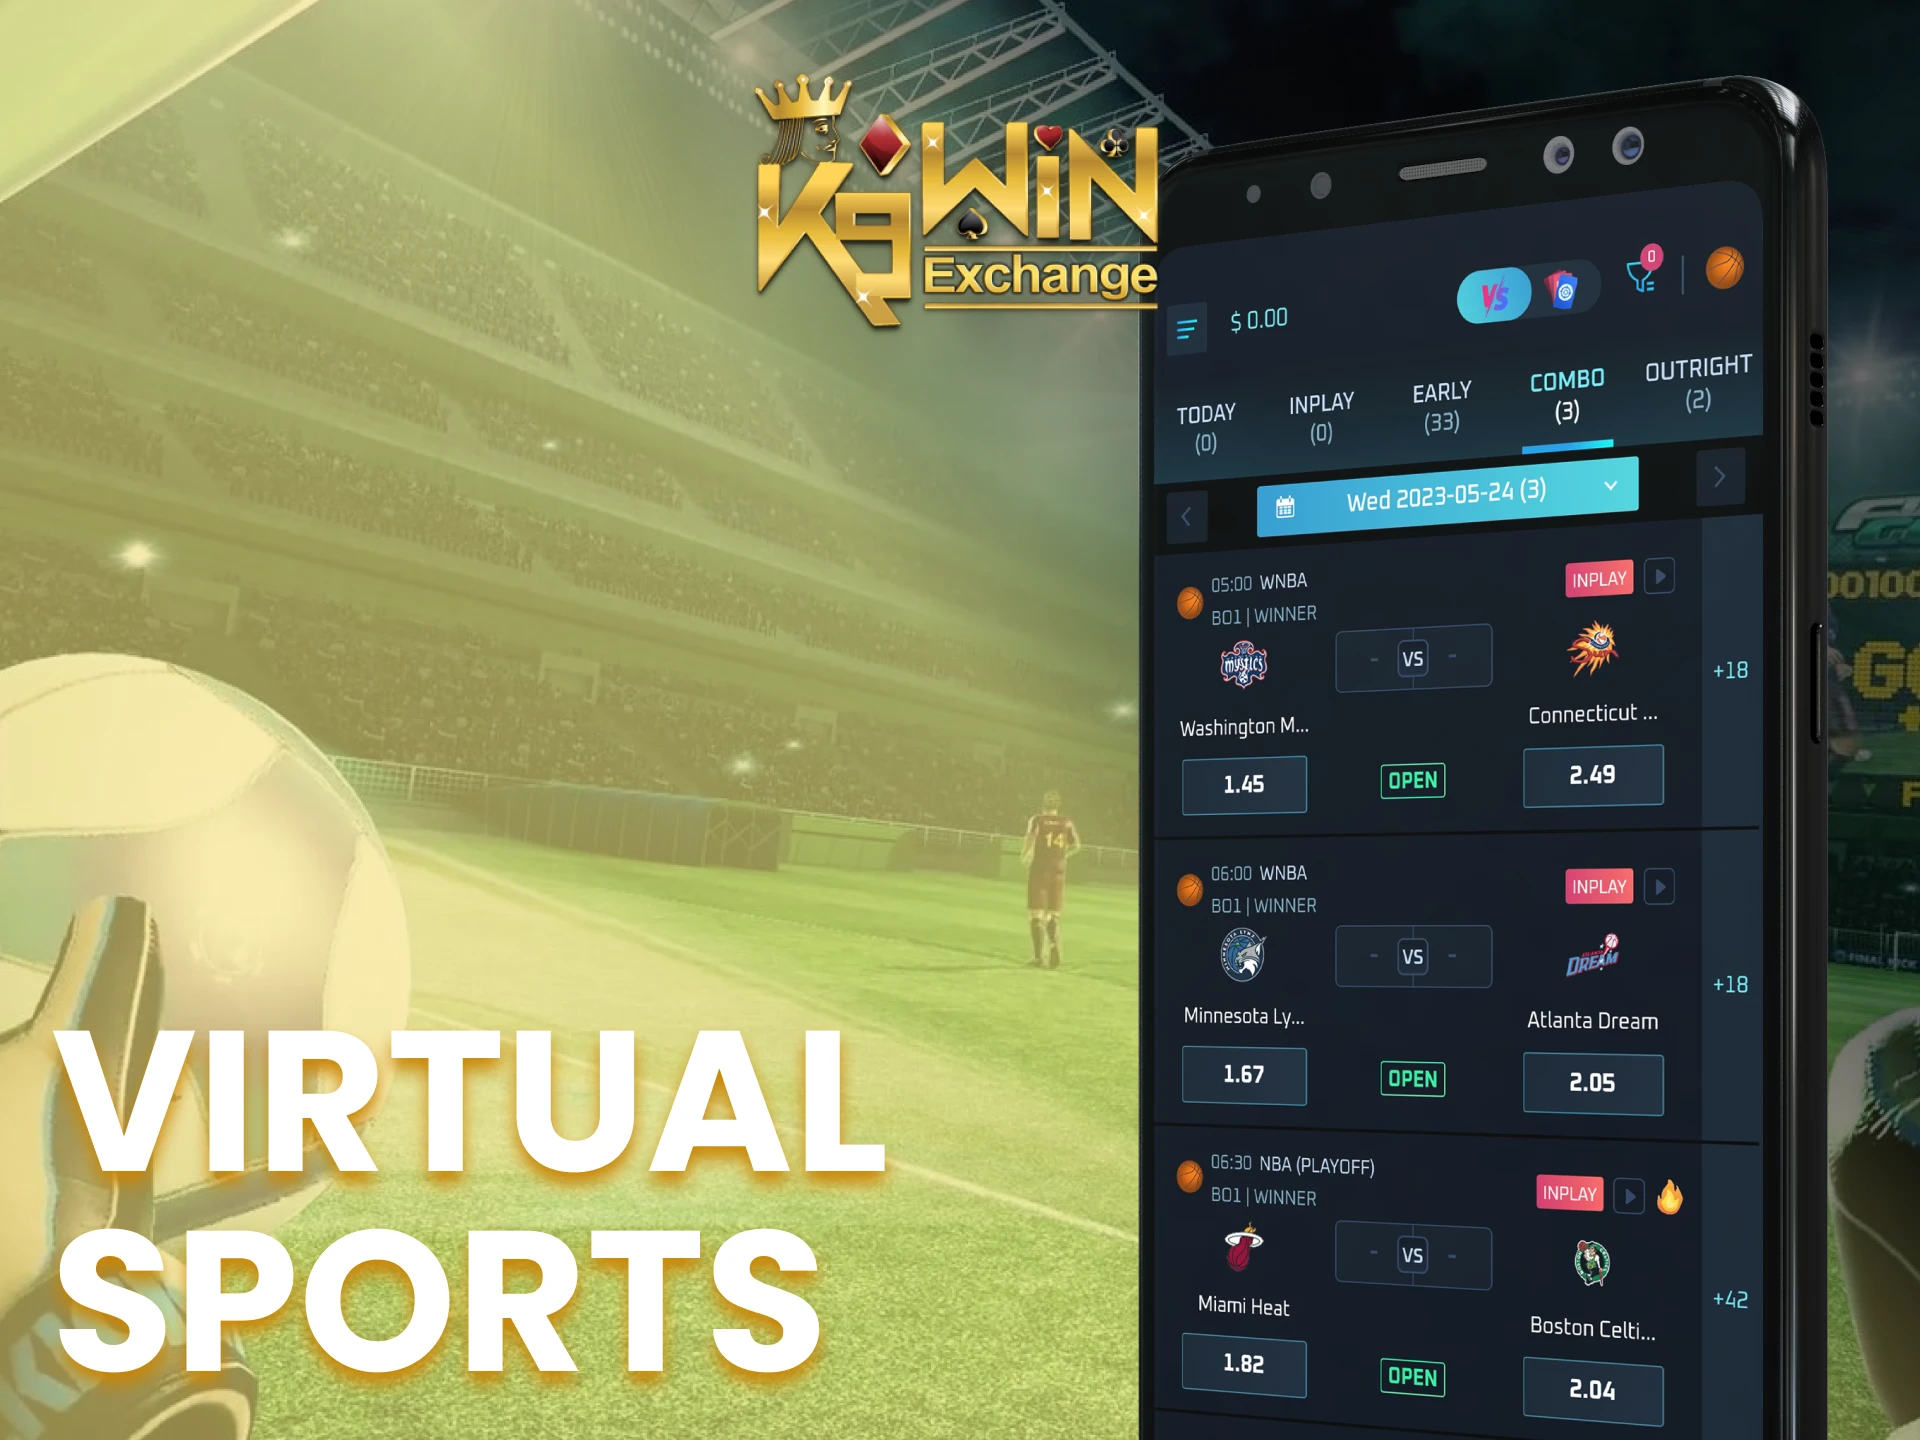 Bet on different virtual sports in the K9Win app.